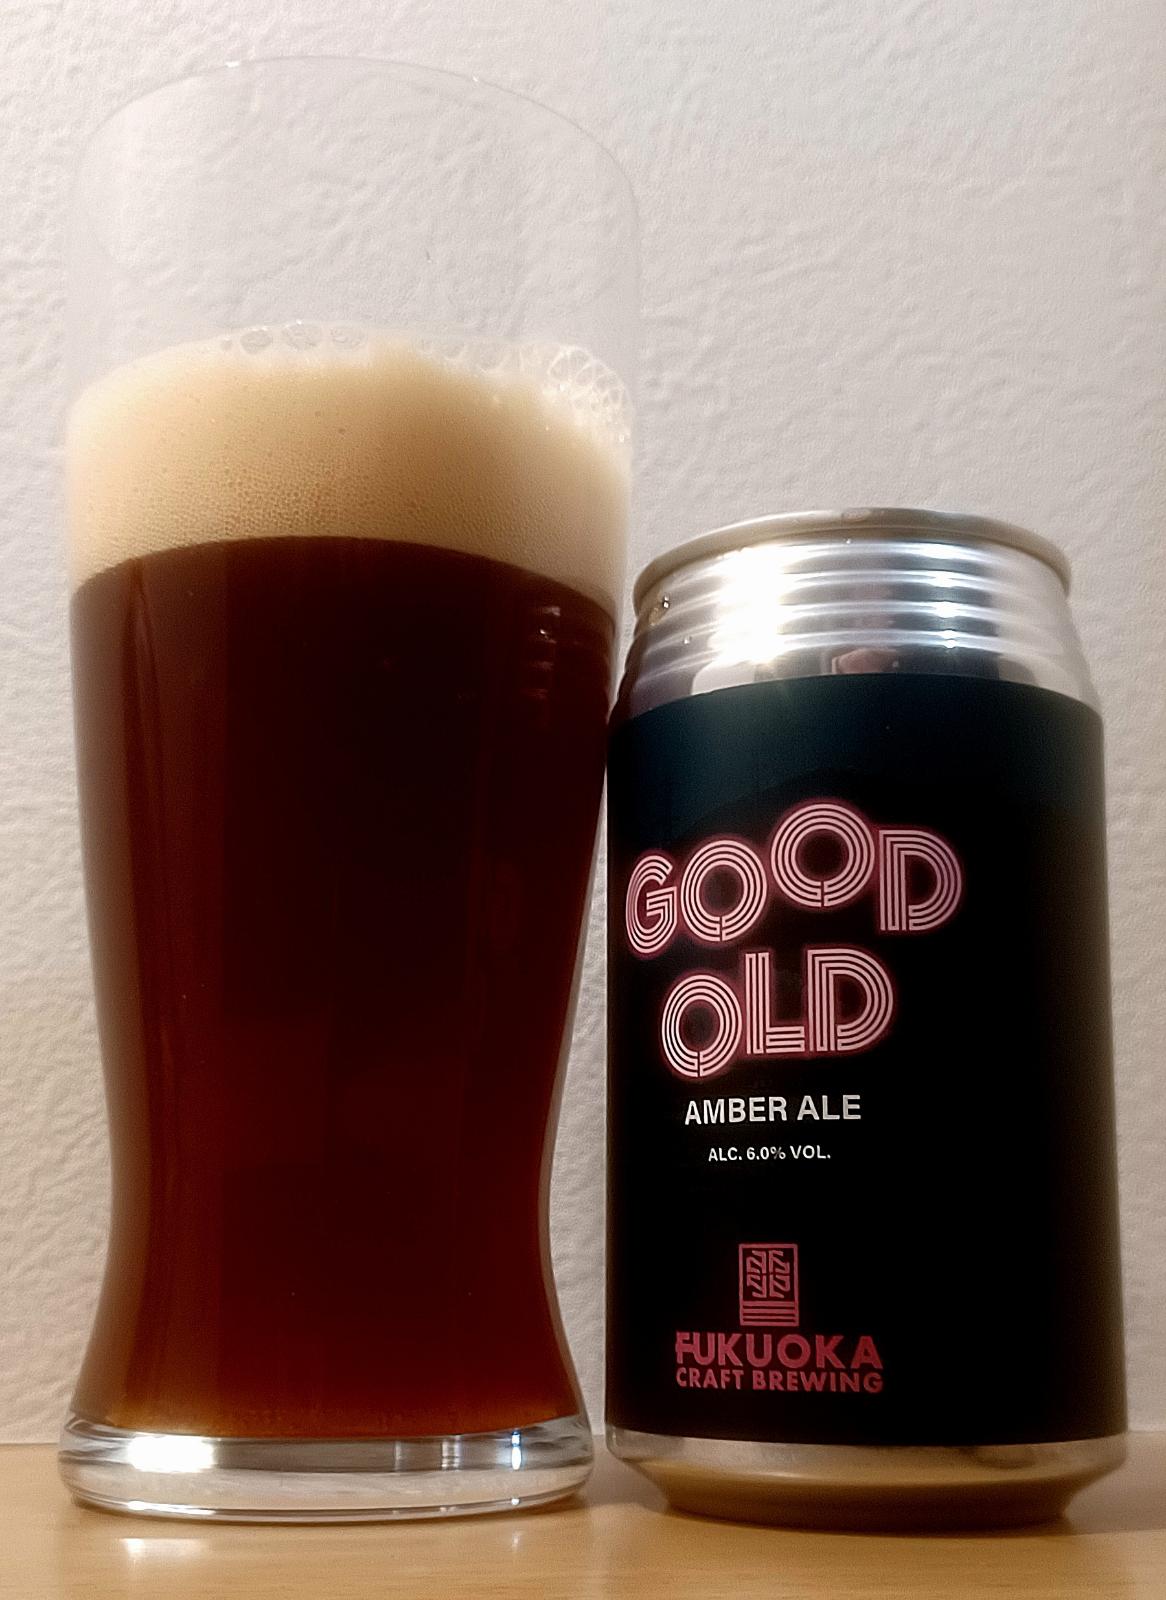 Good Old Amber Ale